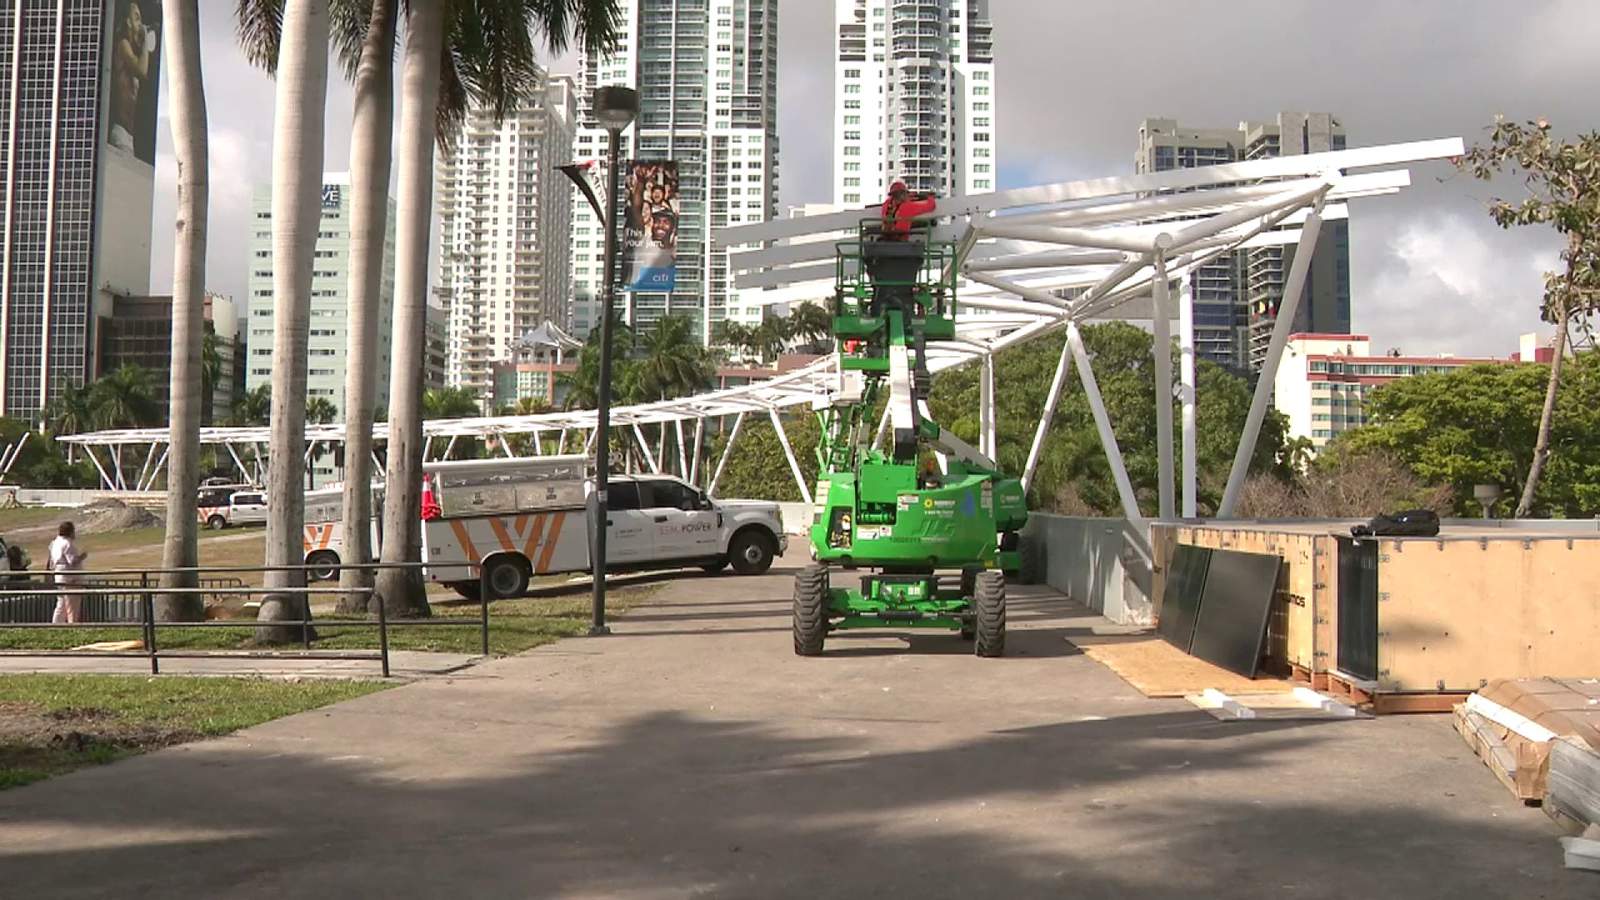 Bayfront Park takes giant green step forward for mankind